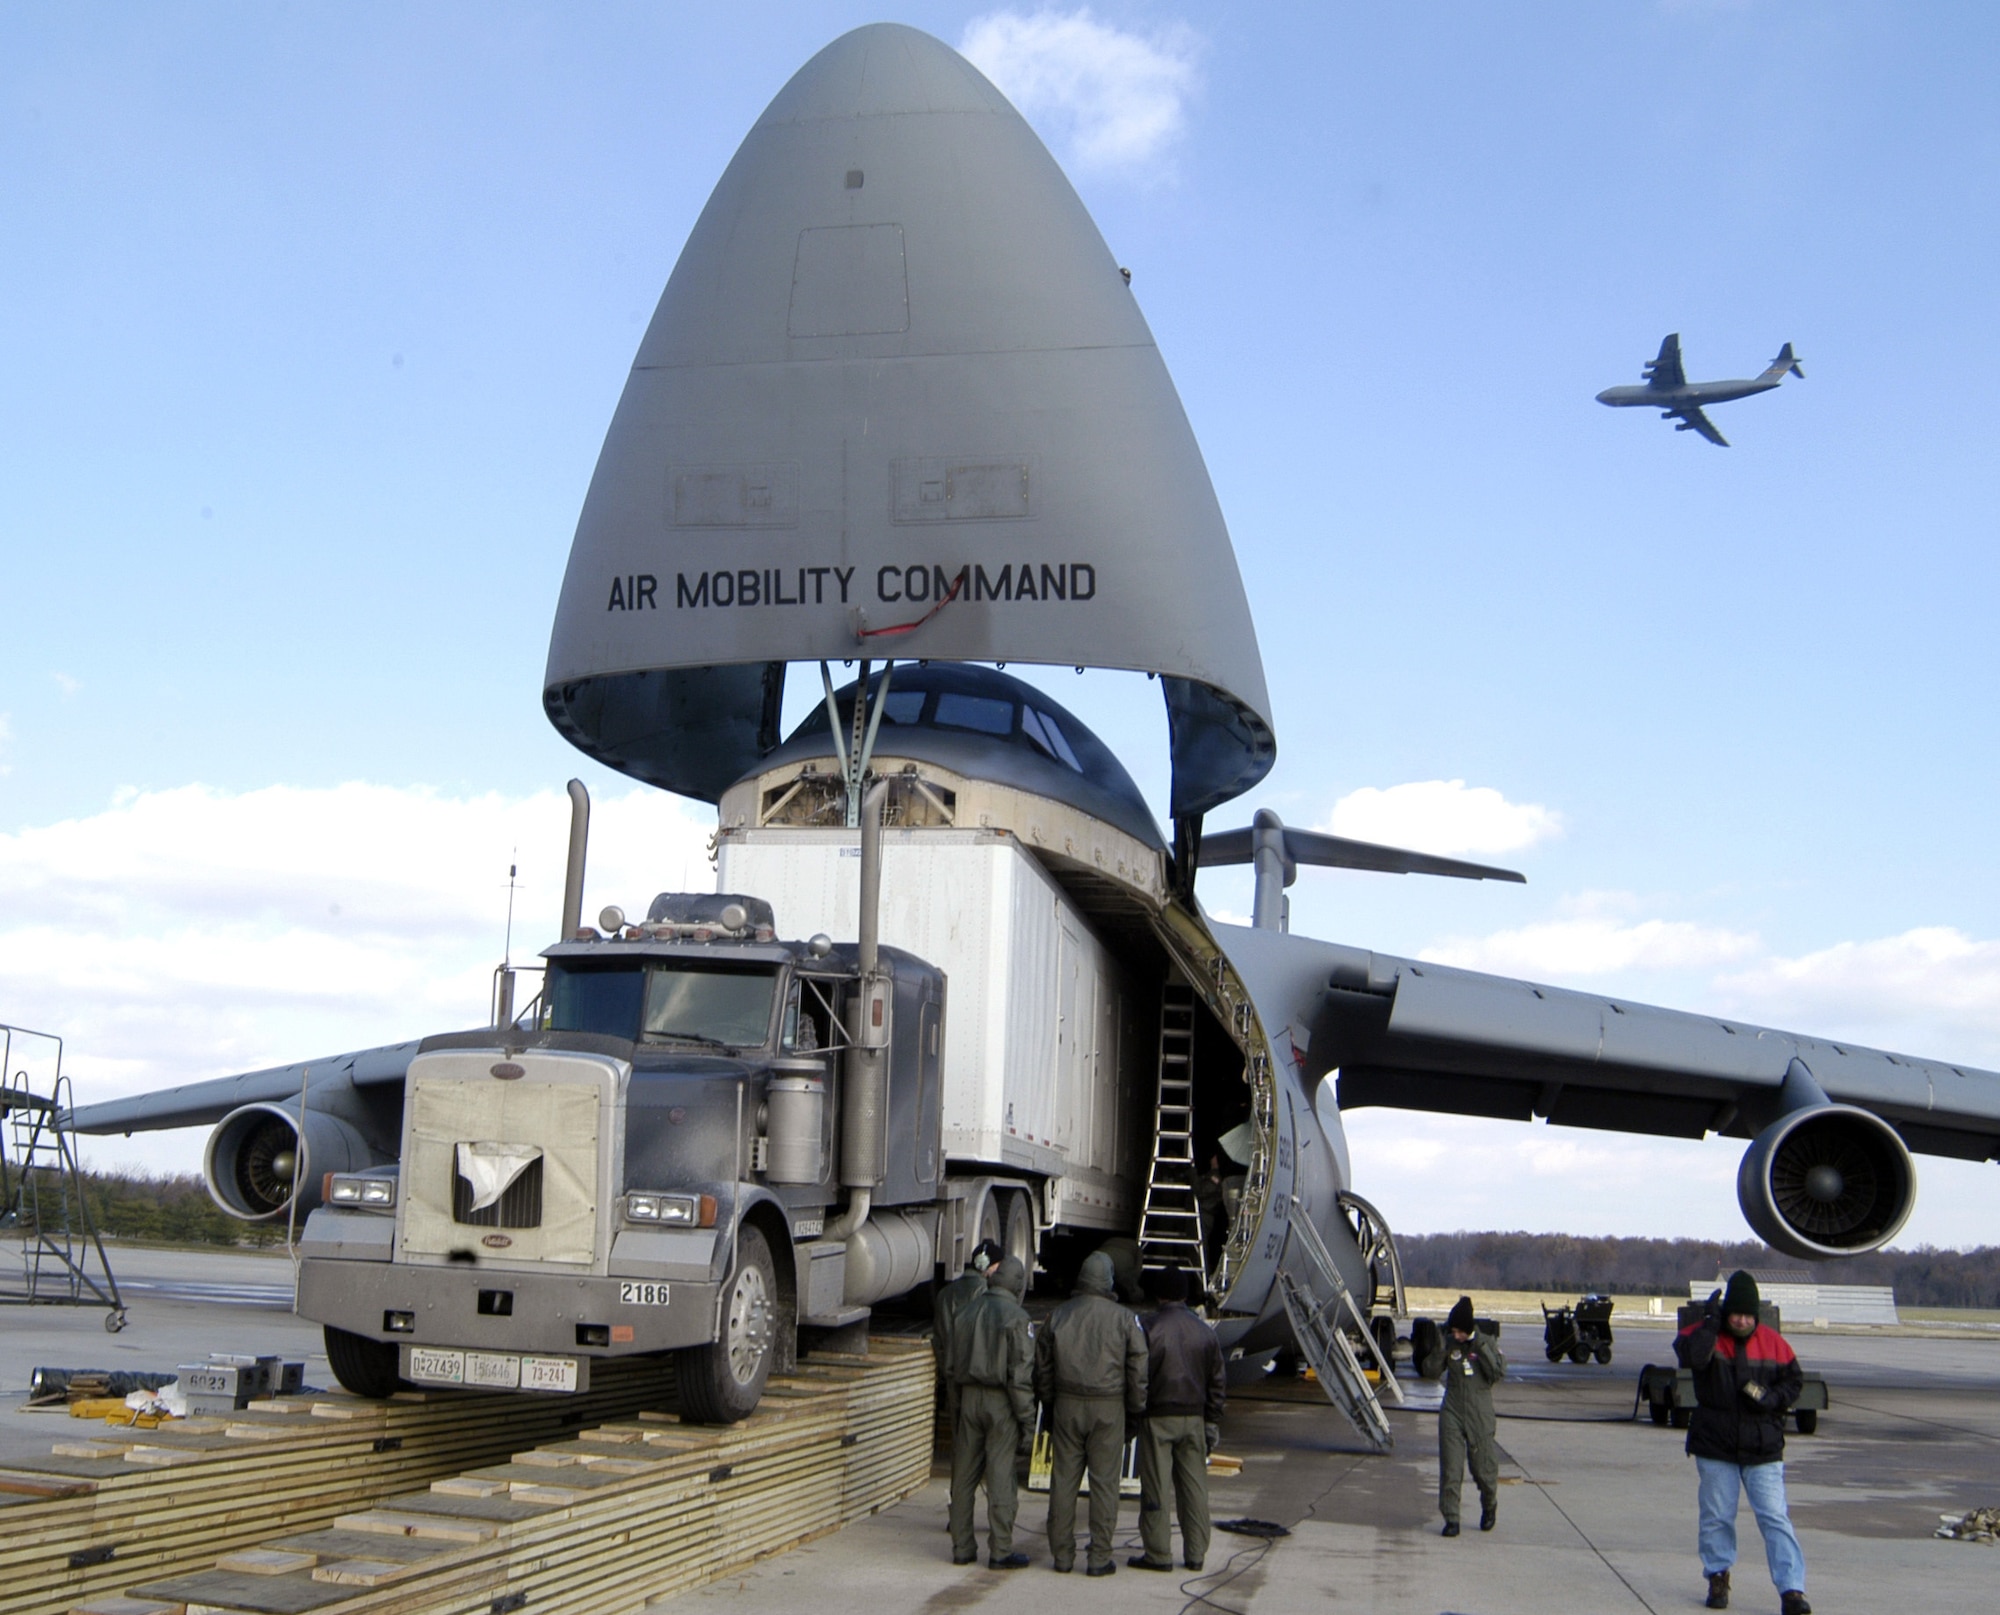 DOVER AIR FORCE BASE, Del. (AFPN) -- Airmen load the Aviation Combined Arms Tactical Trainer onto a C-5 Galaxy with the help of Army contractors. The trainer is an Army helicopter training simulator. Airmen from the 436th Aerial Port Squadron built a ramp specially designed to load the trainer on the transport. Before the ramp's creation, the only way to move the trainer was by ship, which took six to eight weeks to get to Soldiers in the field. (U.S. Air Force photo by Staff Sgt. James Wilkinson)